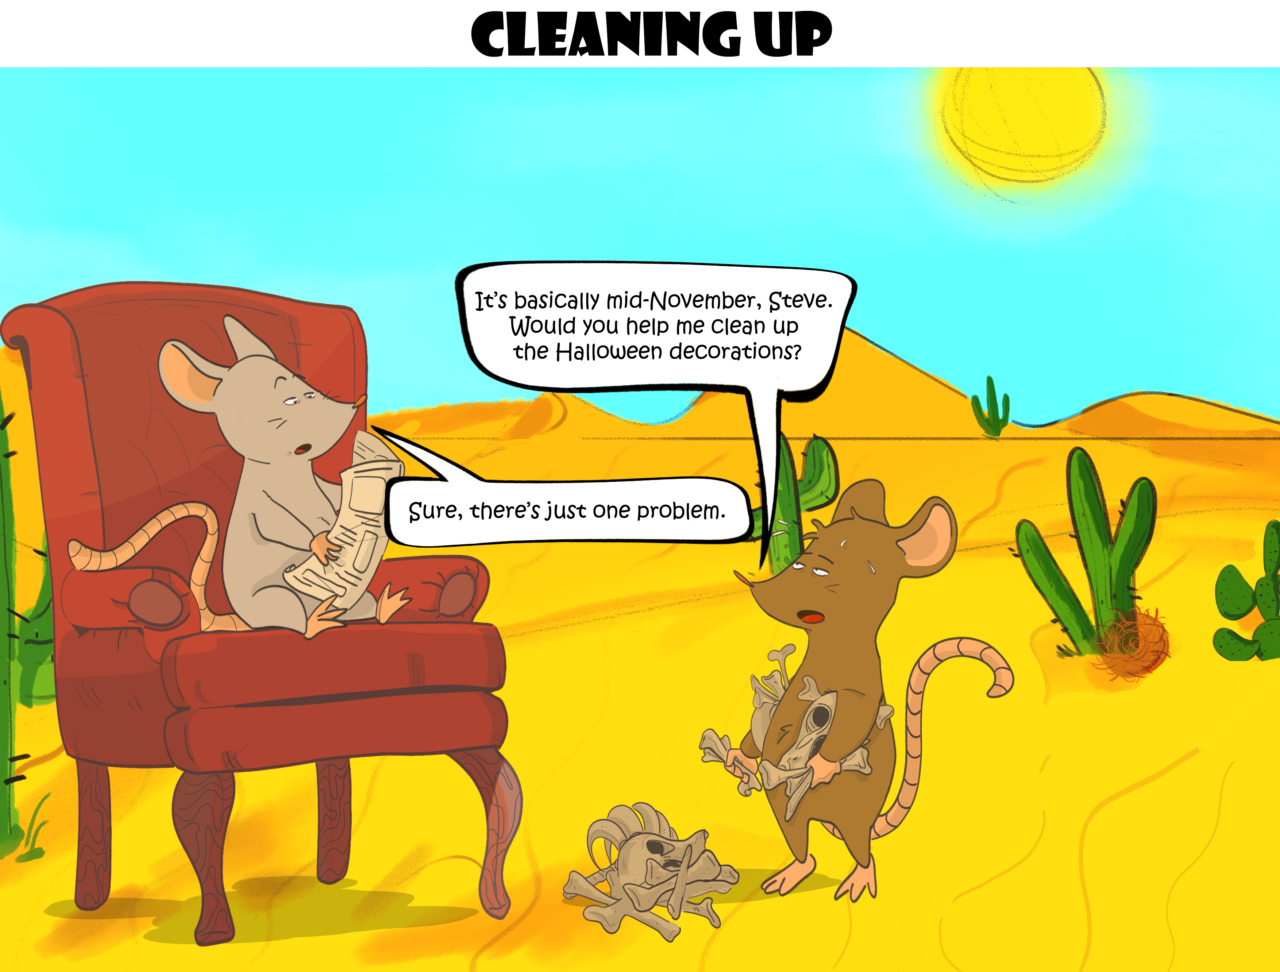 3- Cleaning Up